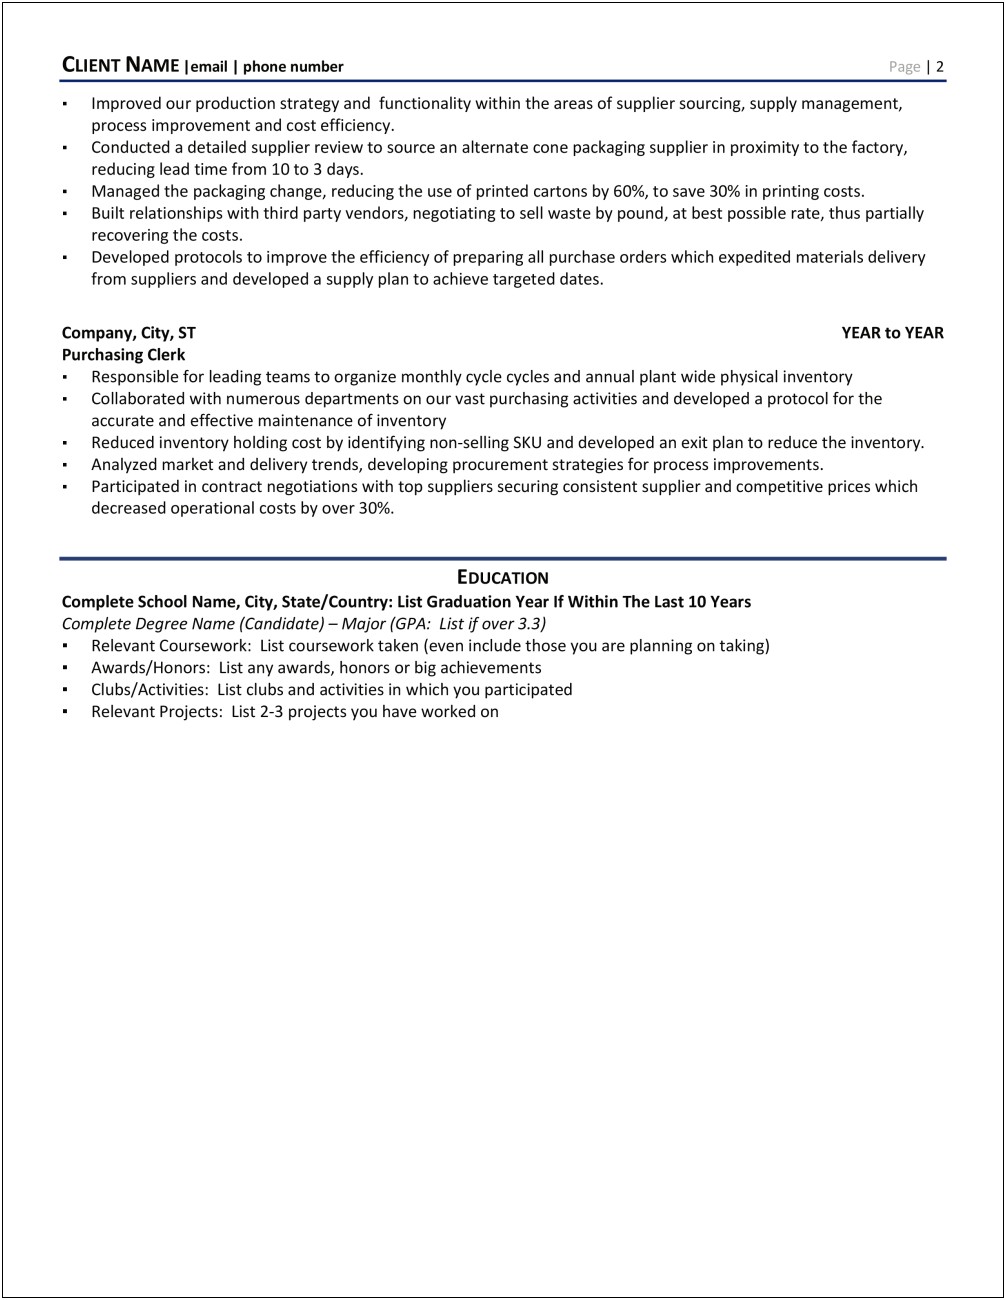 Inventory Control Manager Resume Objective